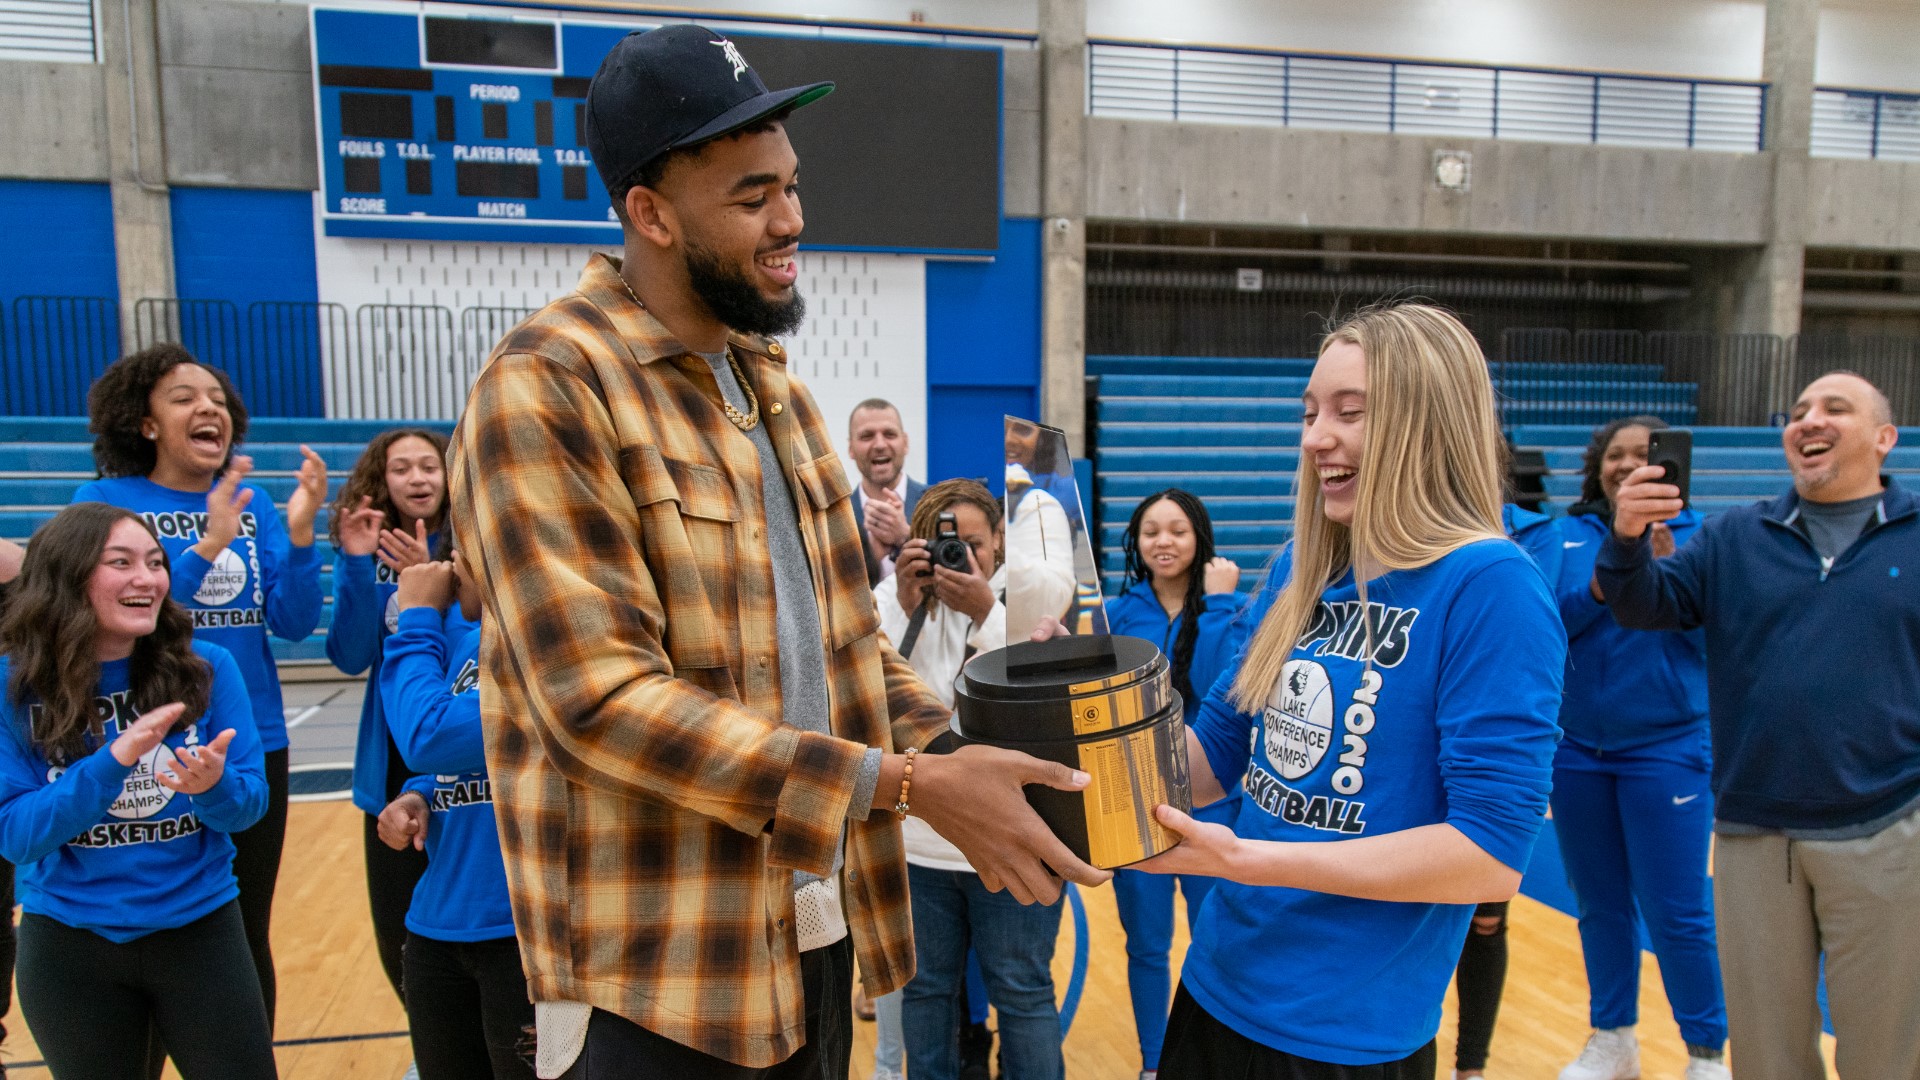 The Minnesota Timberwolves' Karl-Anthony Towns presented the Gatorade National Girls Basketball Player of the Year award to Hopkins senior Paige Bueckers.